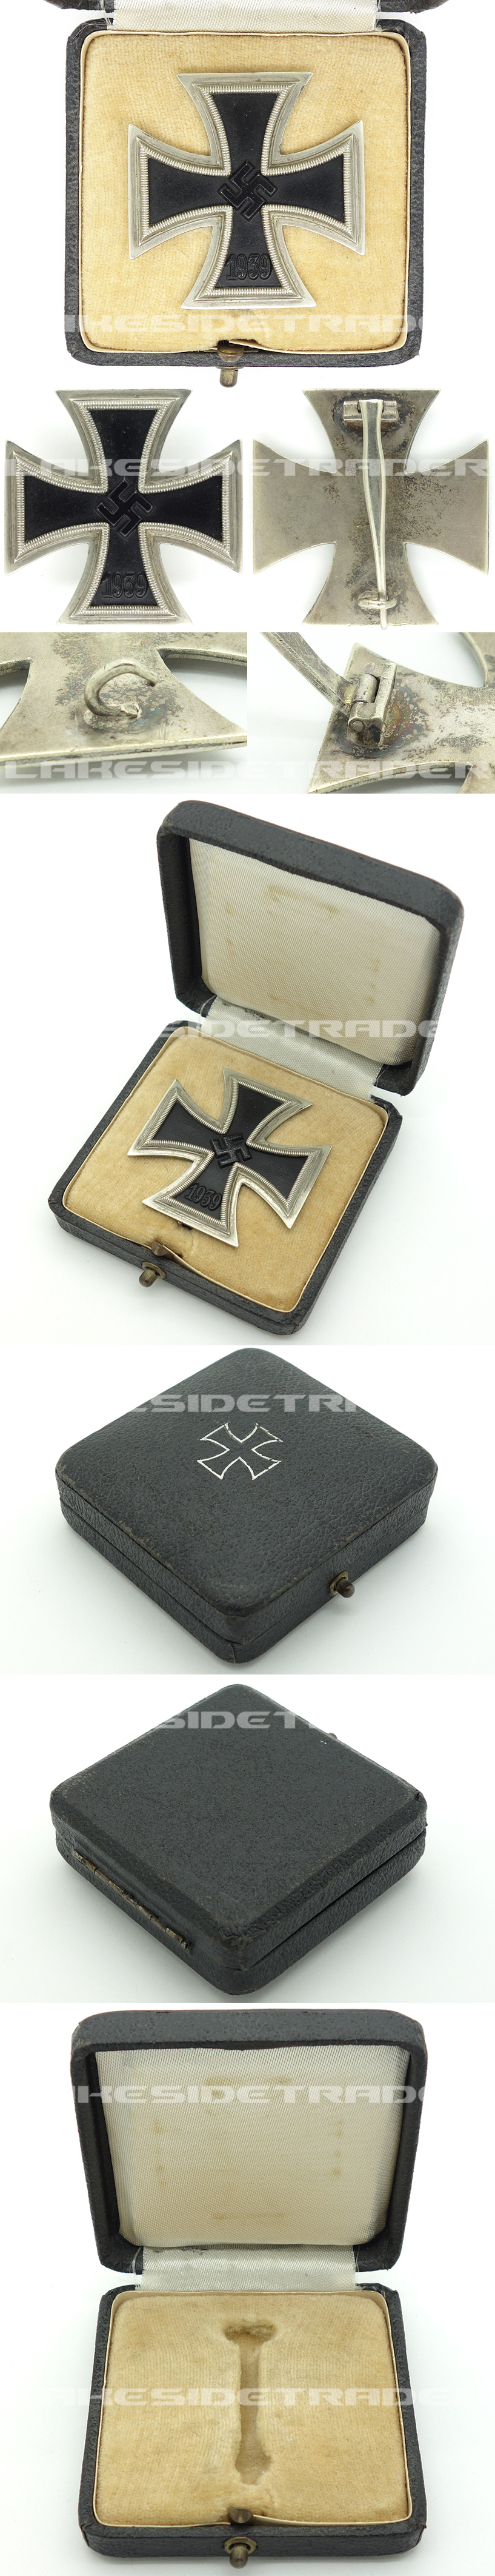 Cased 1st Class Iron Cross by P. Meybauer